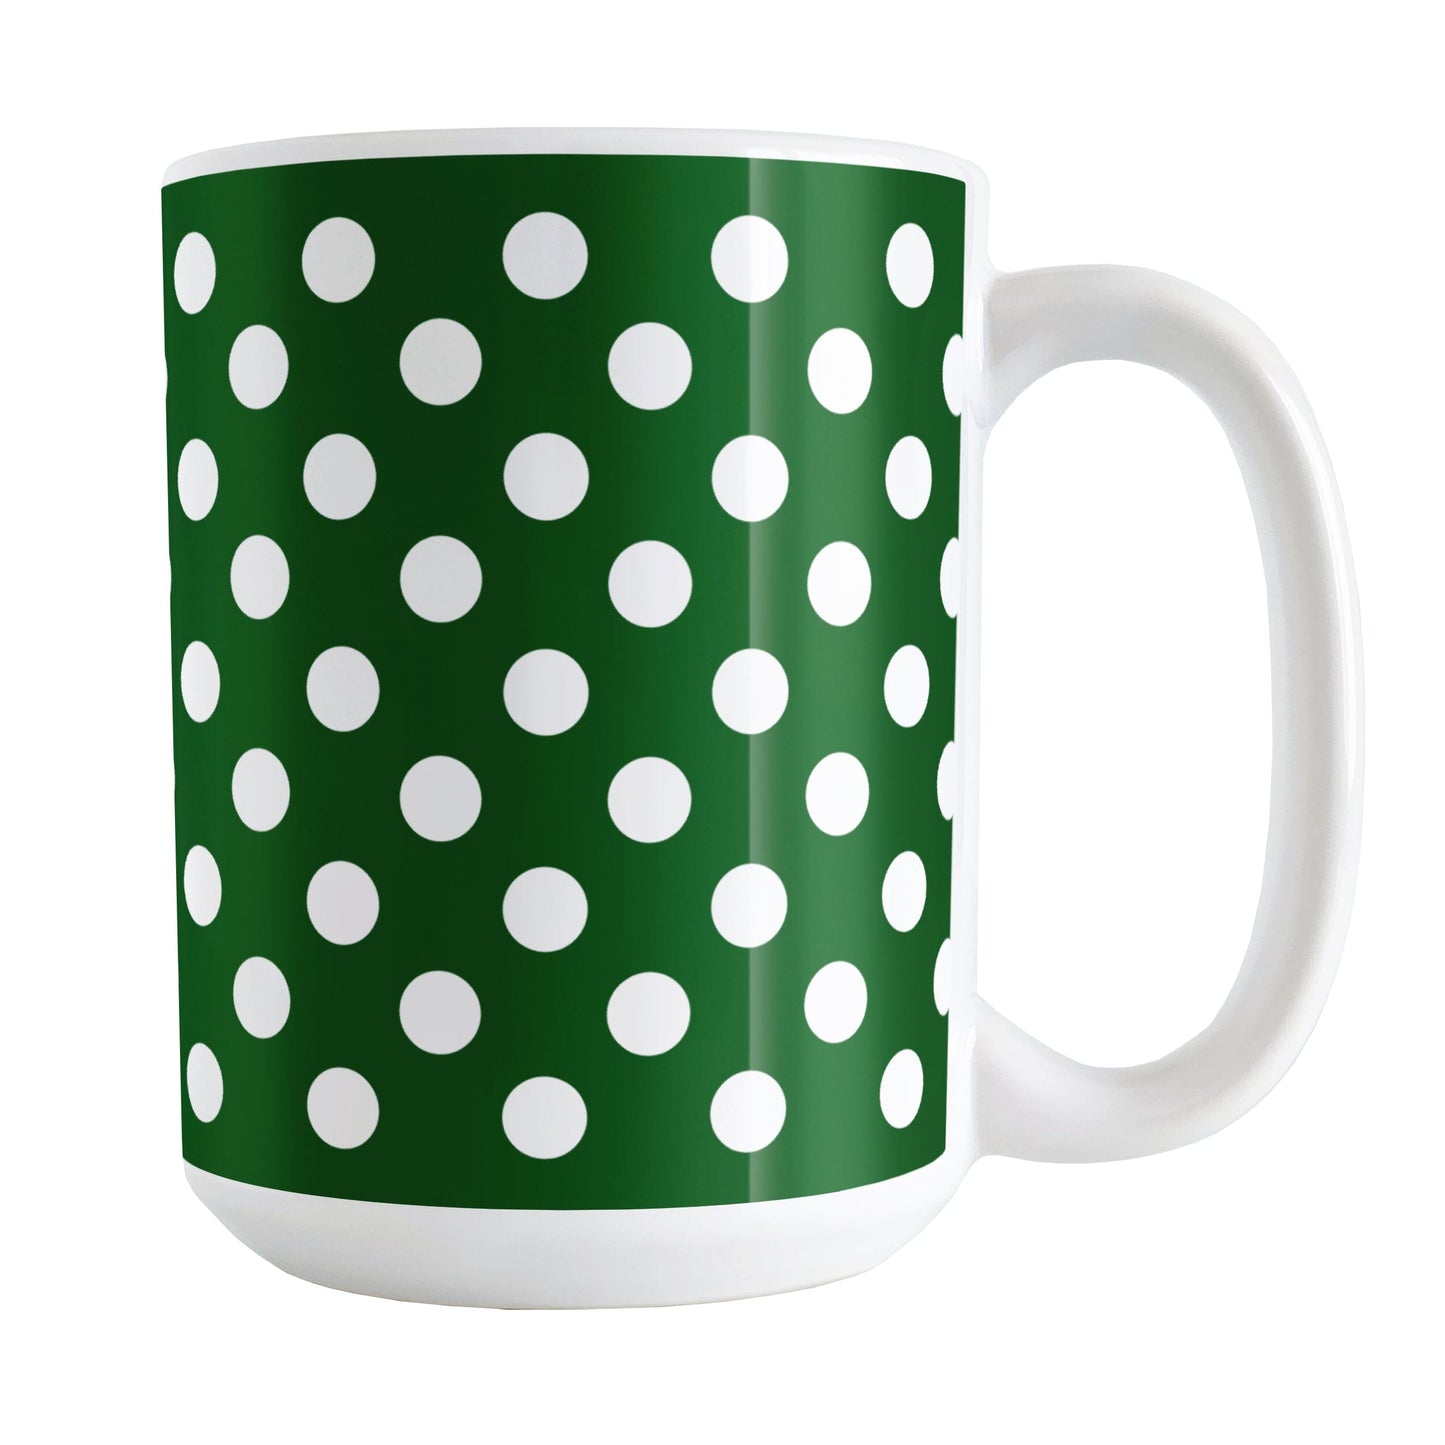 Dark Green Polka Dot Mug (15oz) at Amy's Coffee Mugs. A ceramic coffee mug designed with a dark green polka dot pattern with white dots over a dark green background color. This polka dotted pattern wraps around the mug to the handle.